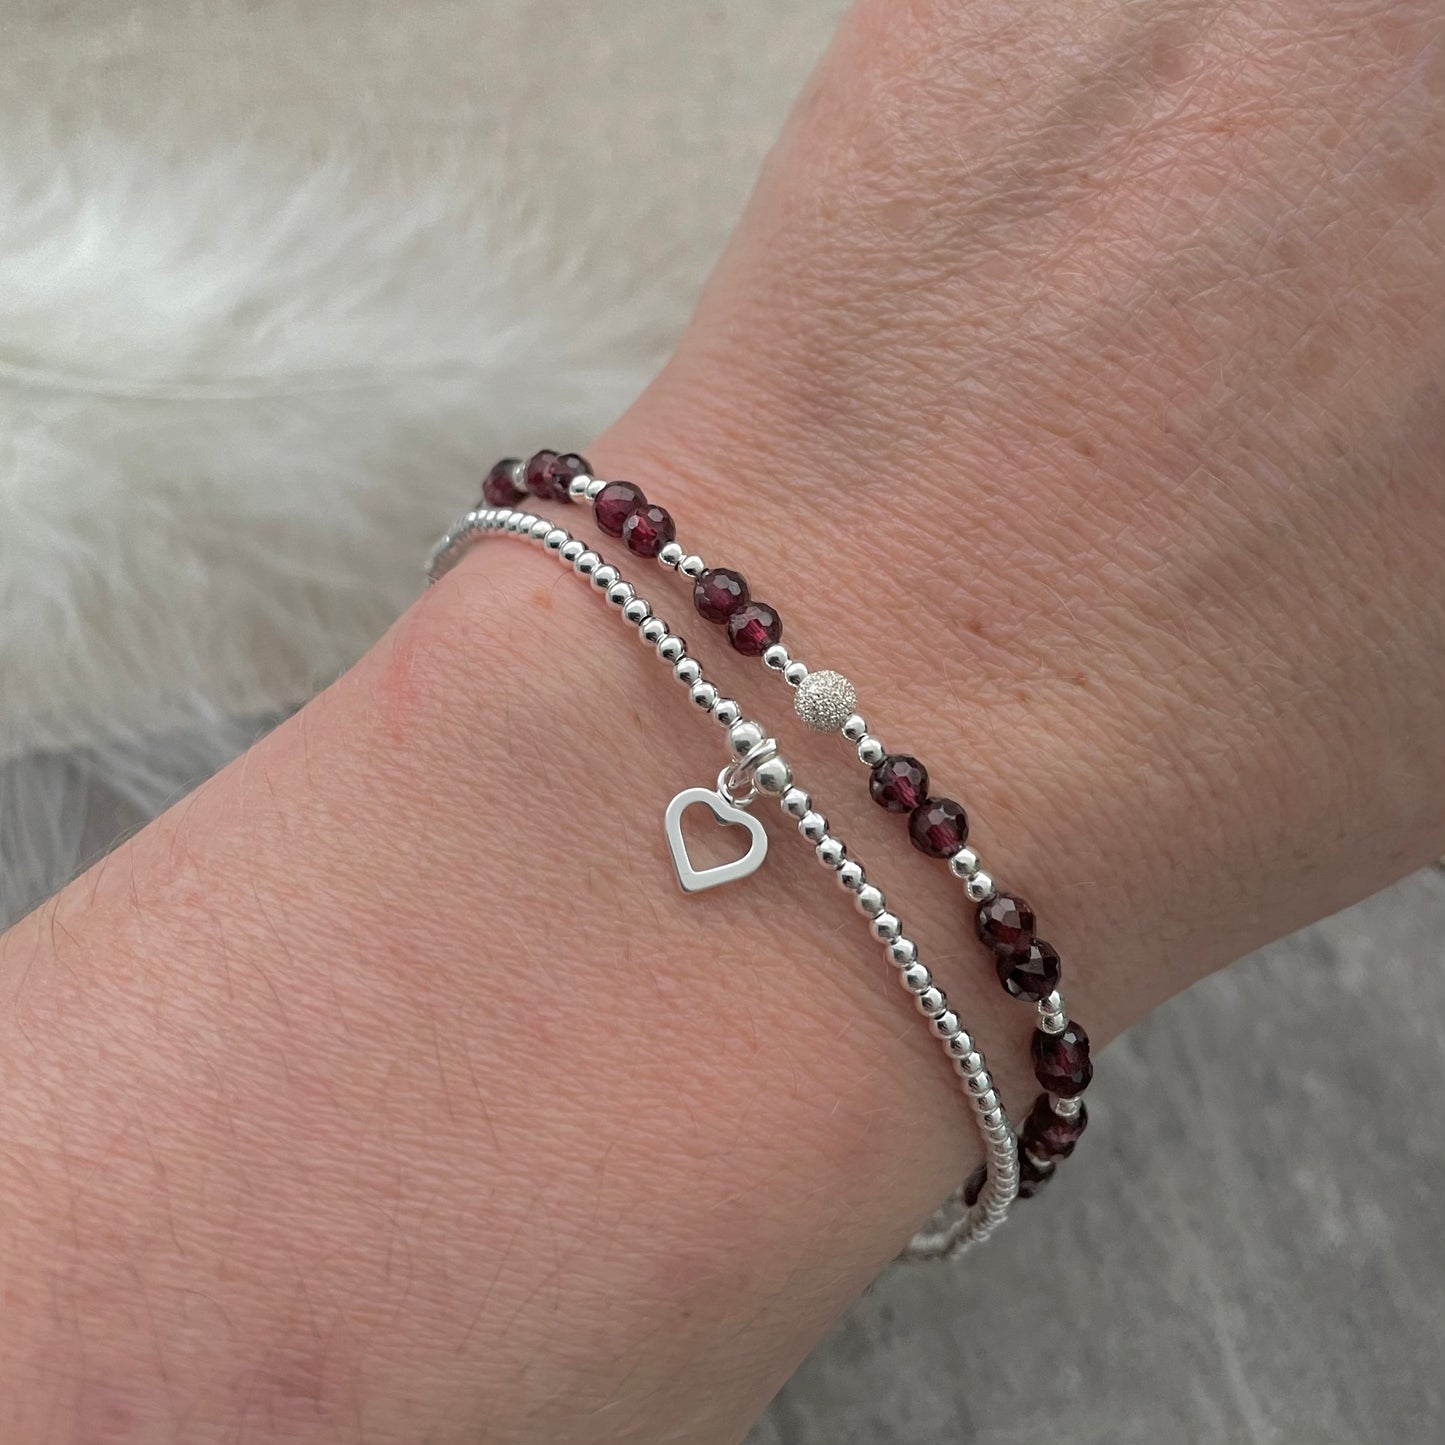 Garnet Bracelet Set made with January Birthstone and Sterling Silver, January Birthday Gift for Women